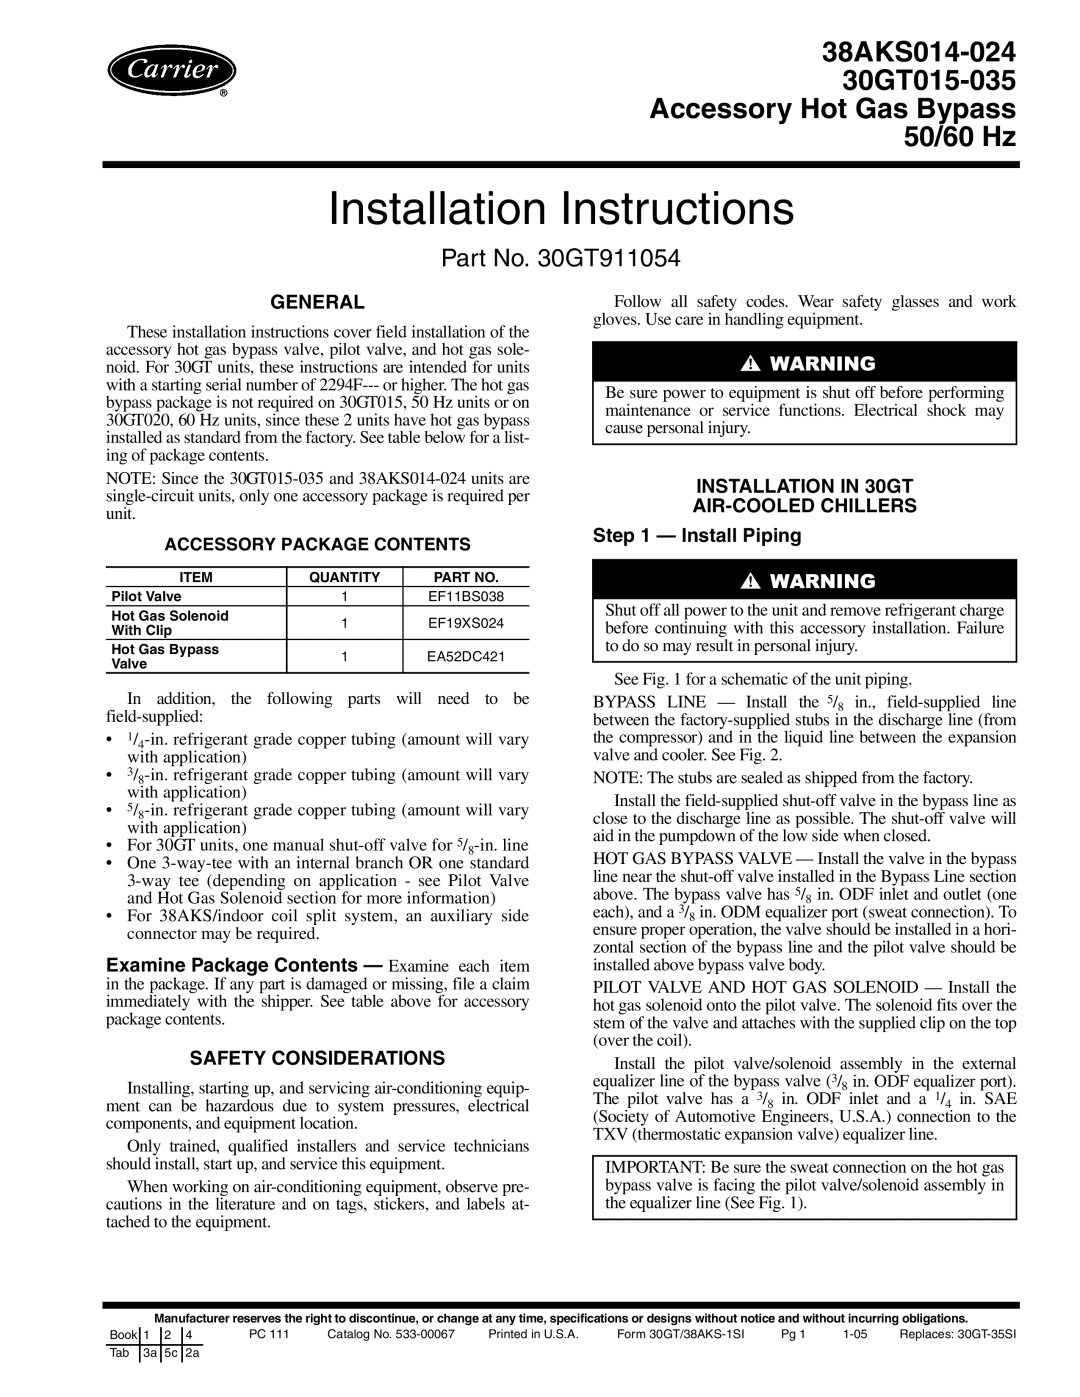 Carrier 30GT015-035 installation instructions General, INSTALLATION IN 30GT AIR-COOLED CHILLERS - Install Piping 